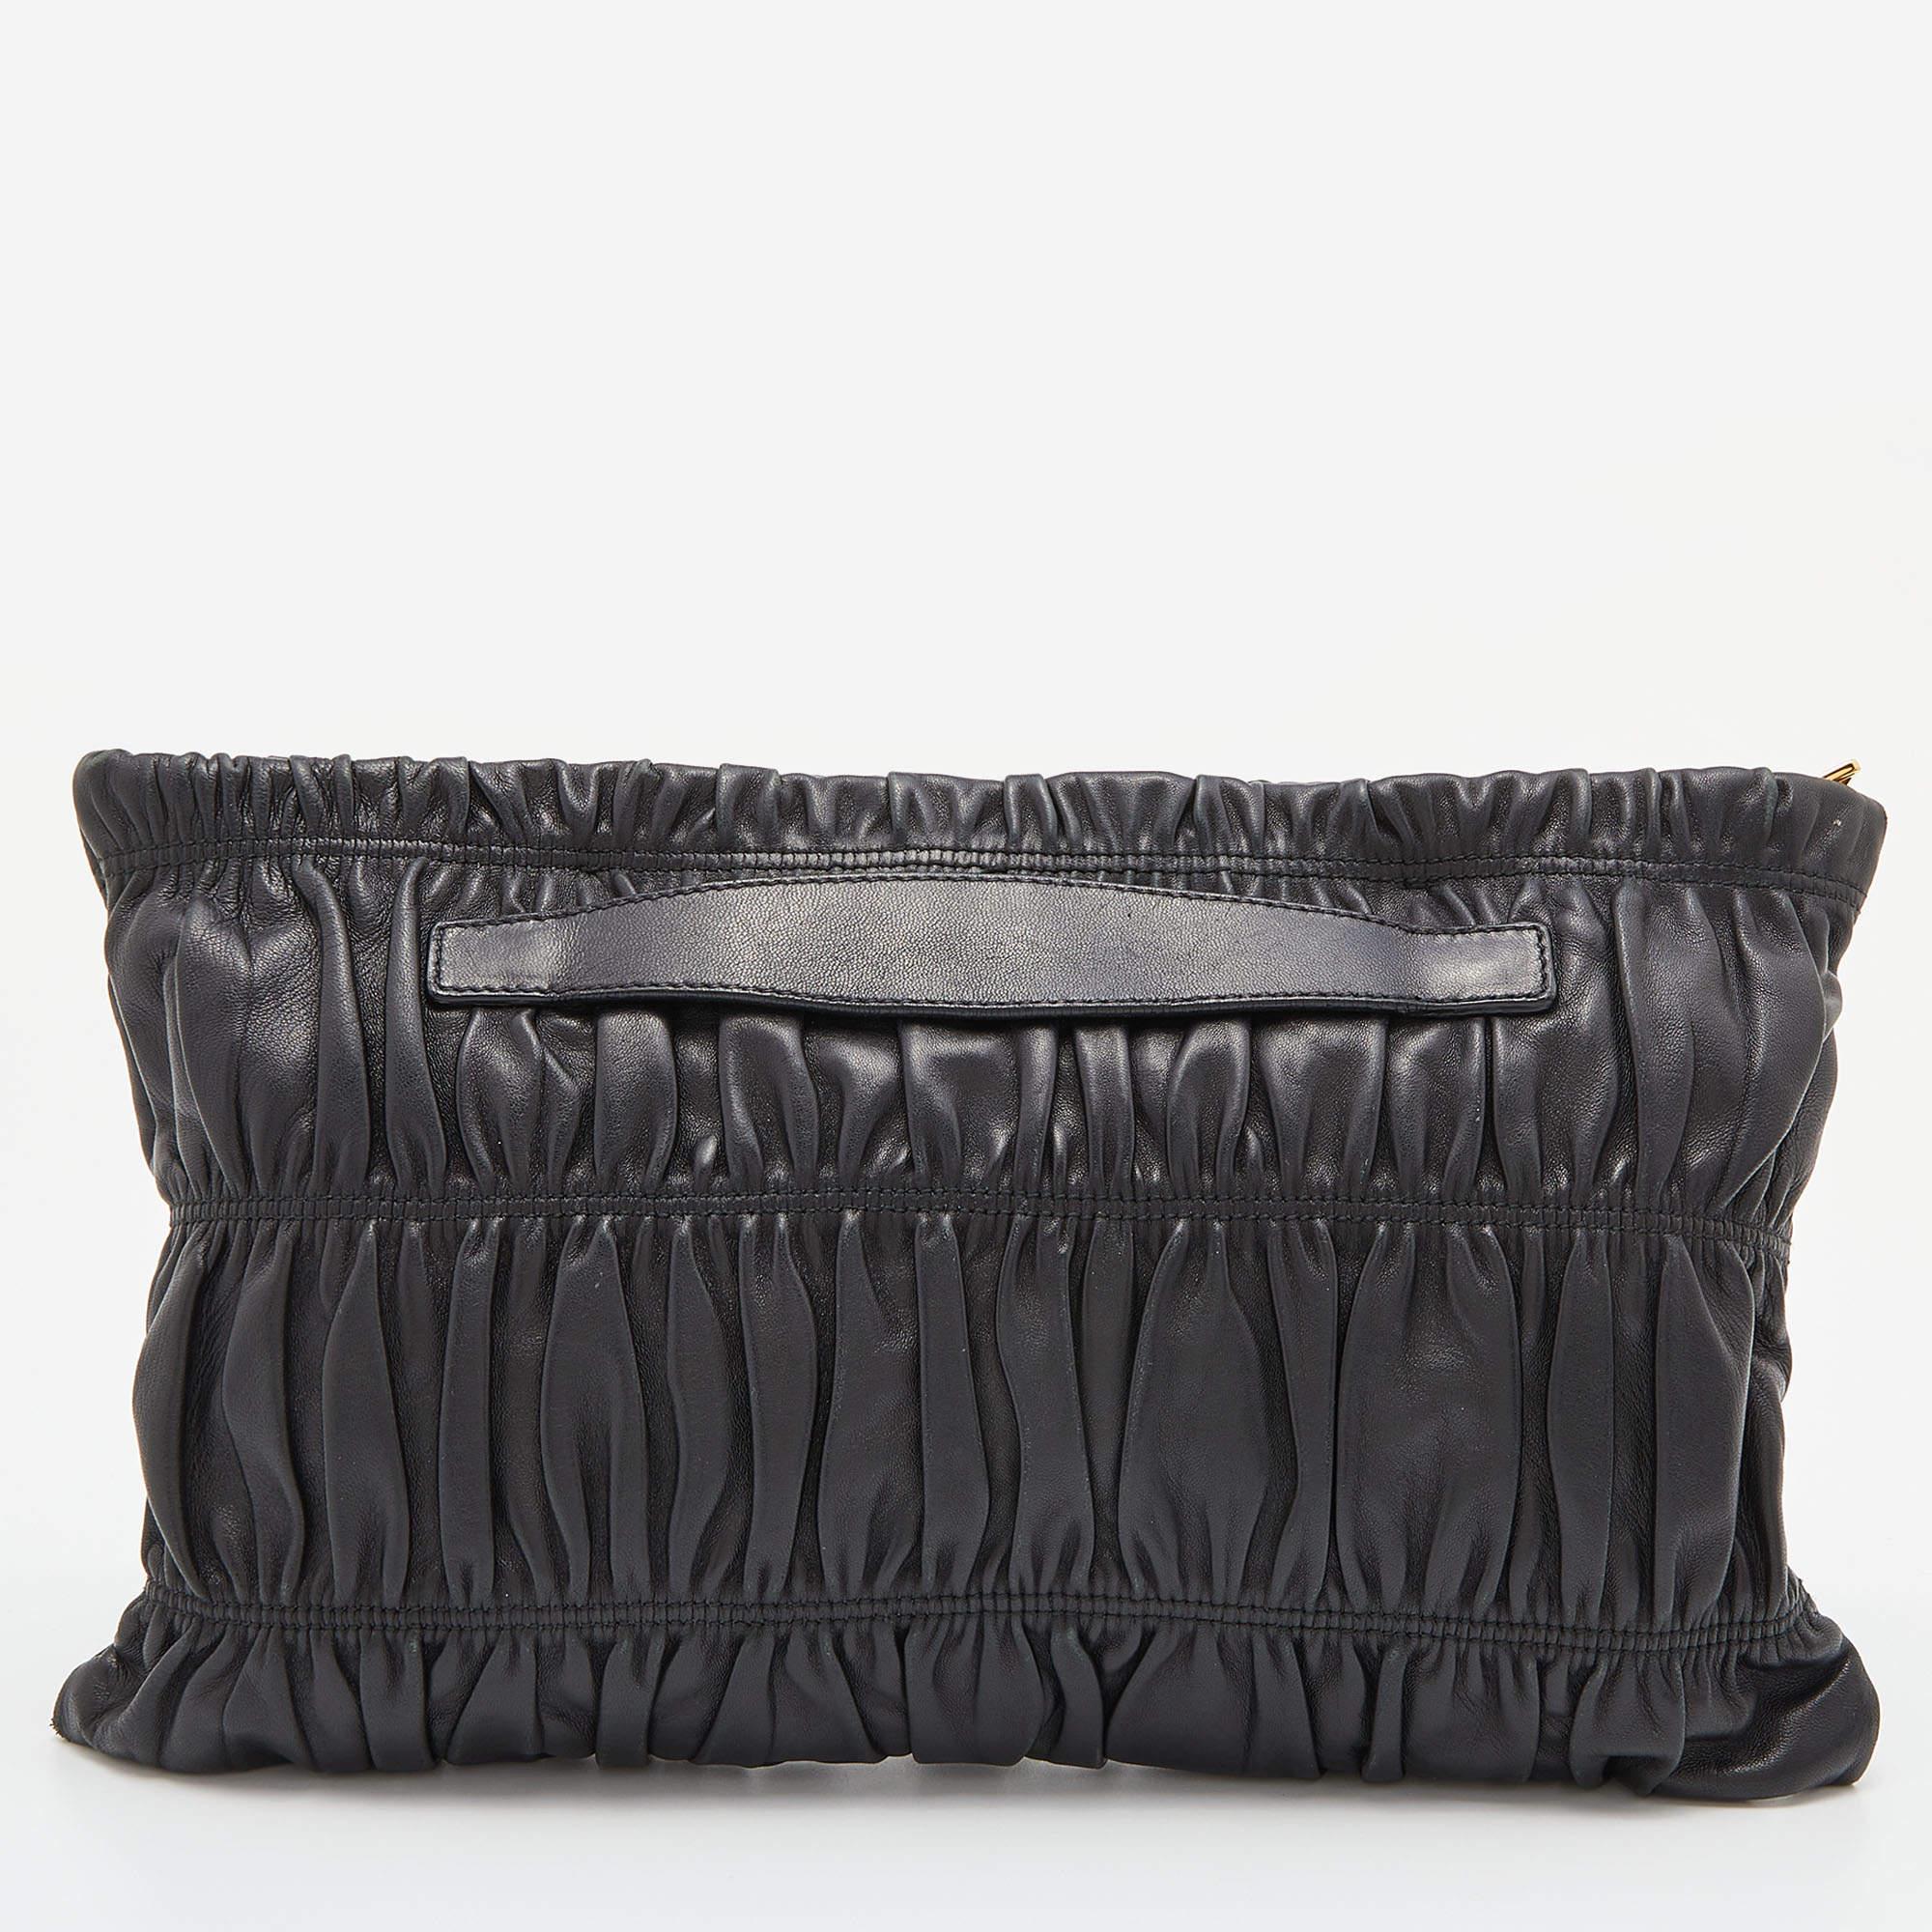 This Prada clutch will instantly please the elegant you. Crafted from black Nappa leather, its signature gauffre-gathered detail is beautifully complemented with gold-tone brand detailing on the front. The nylon-lined interior has ample space to